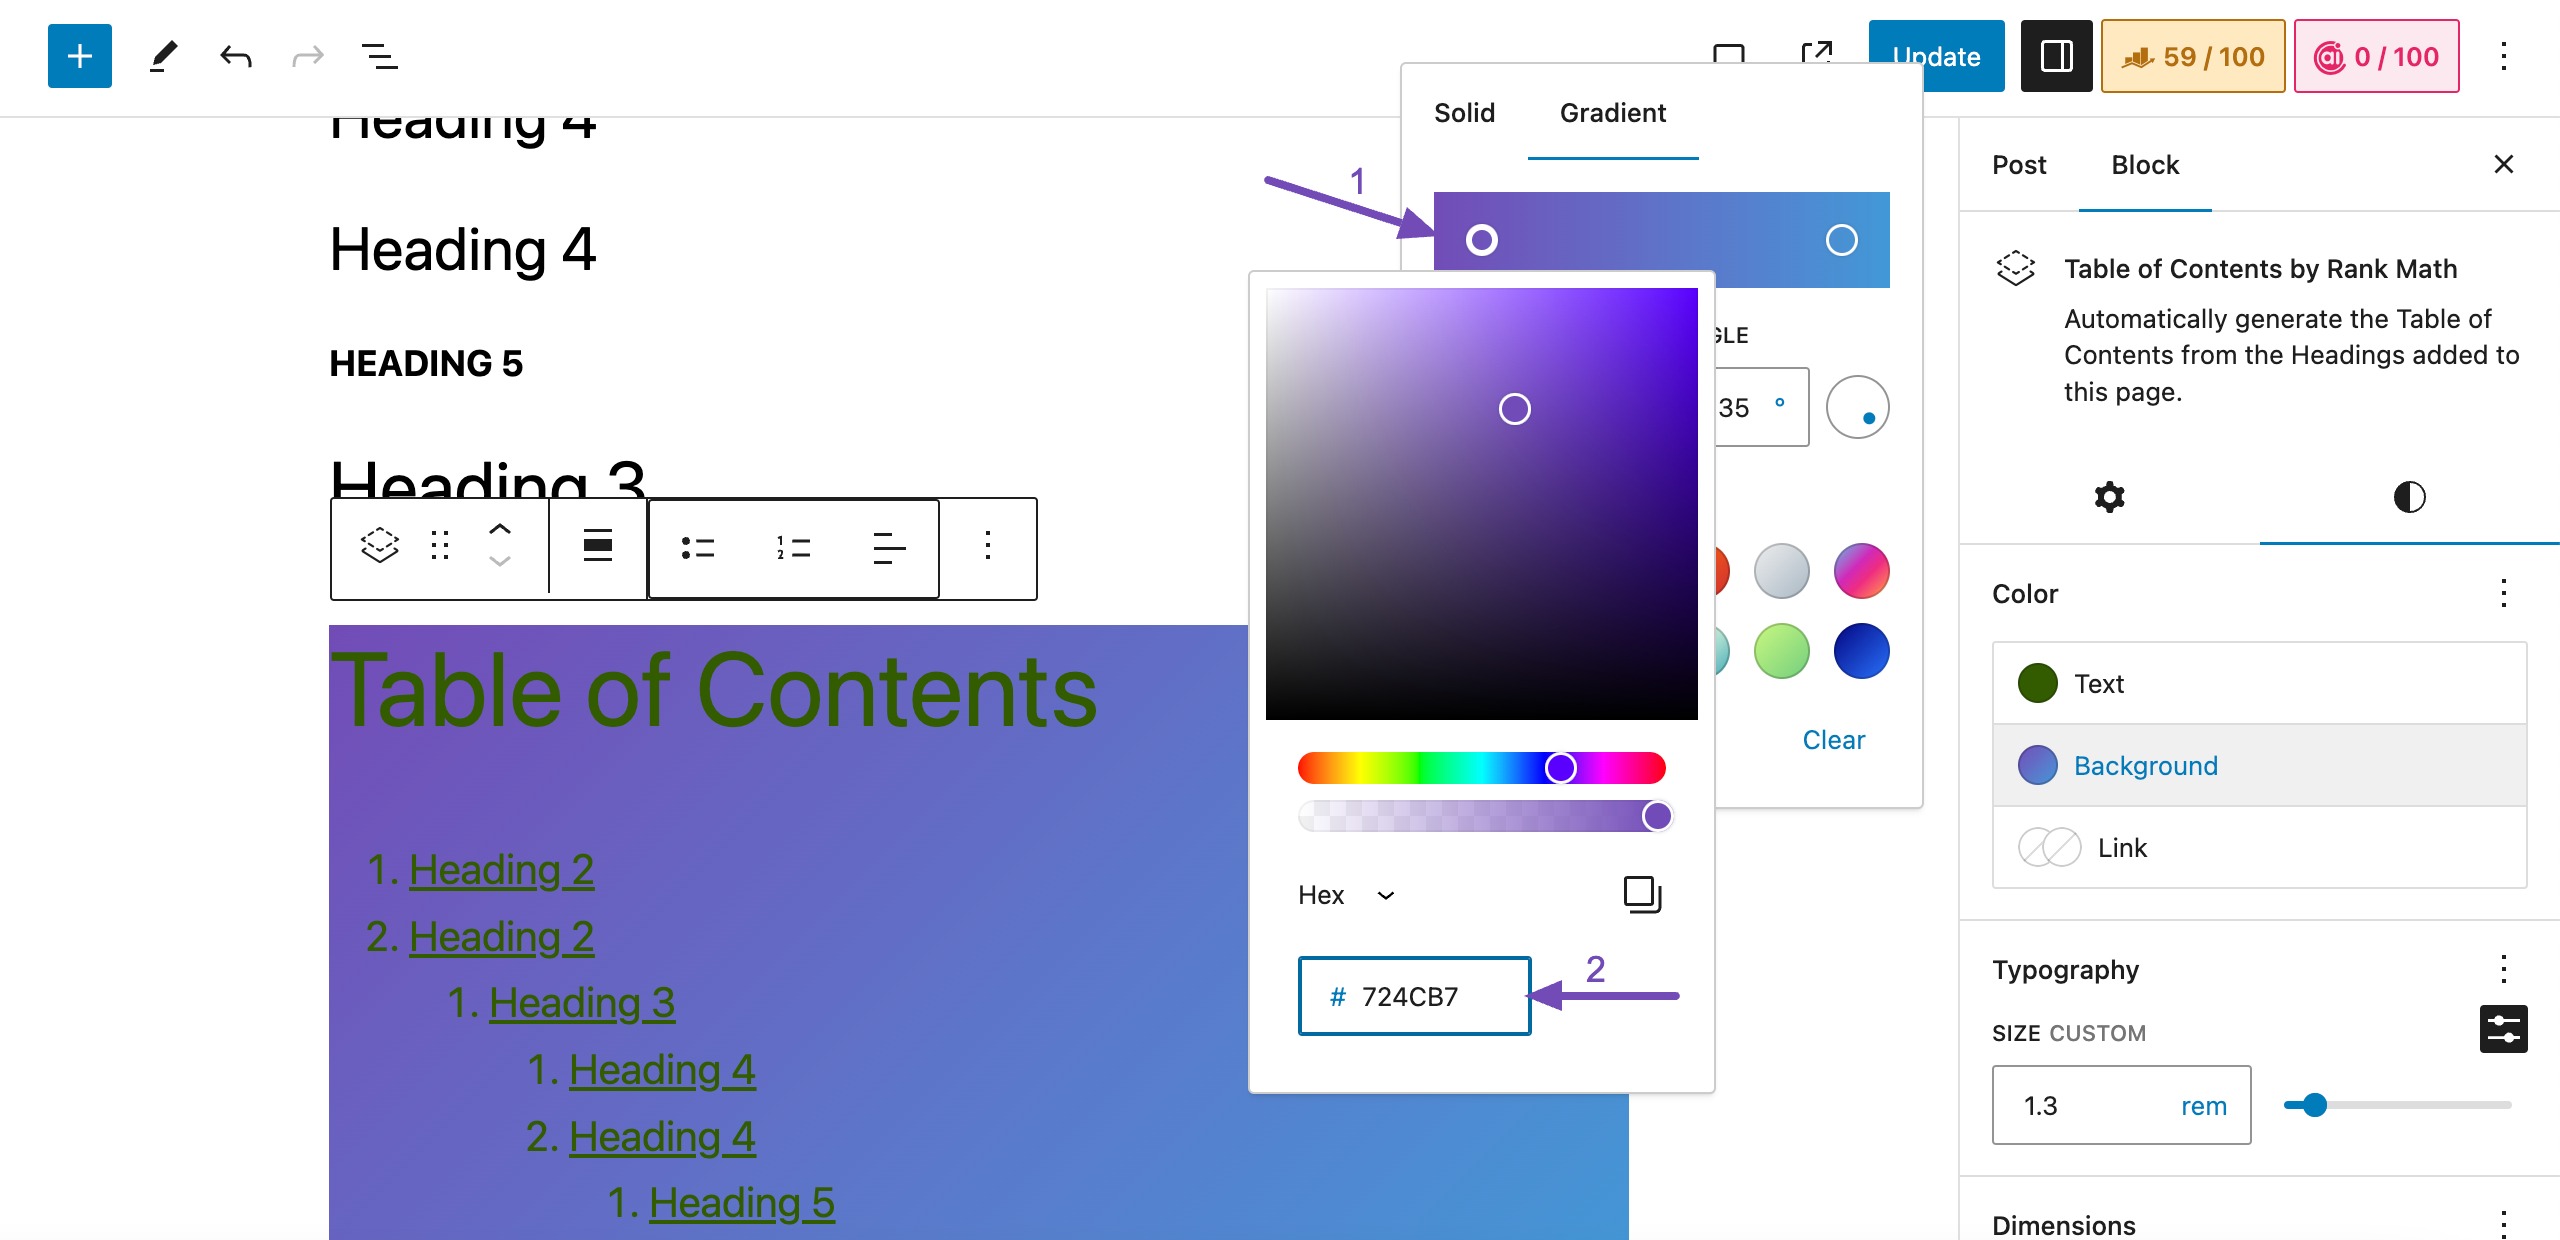 Add color control points